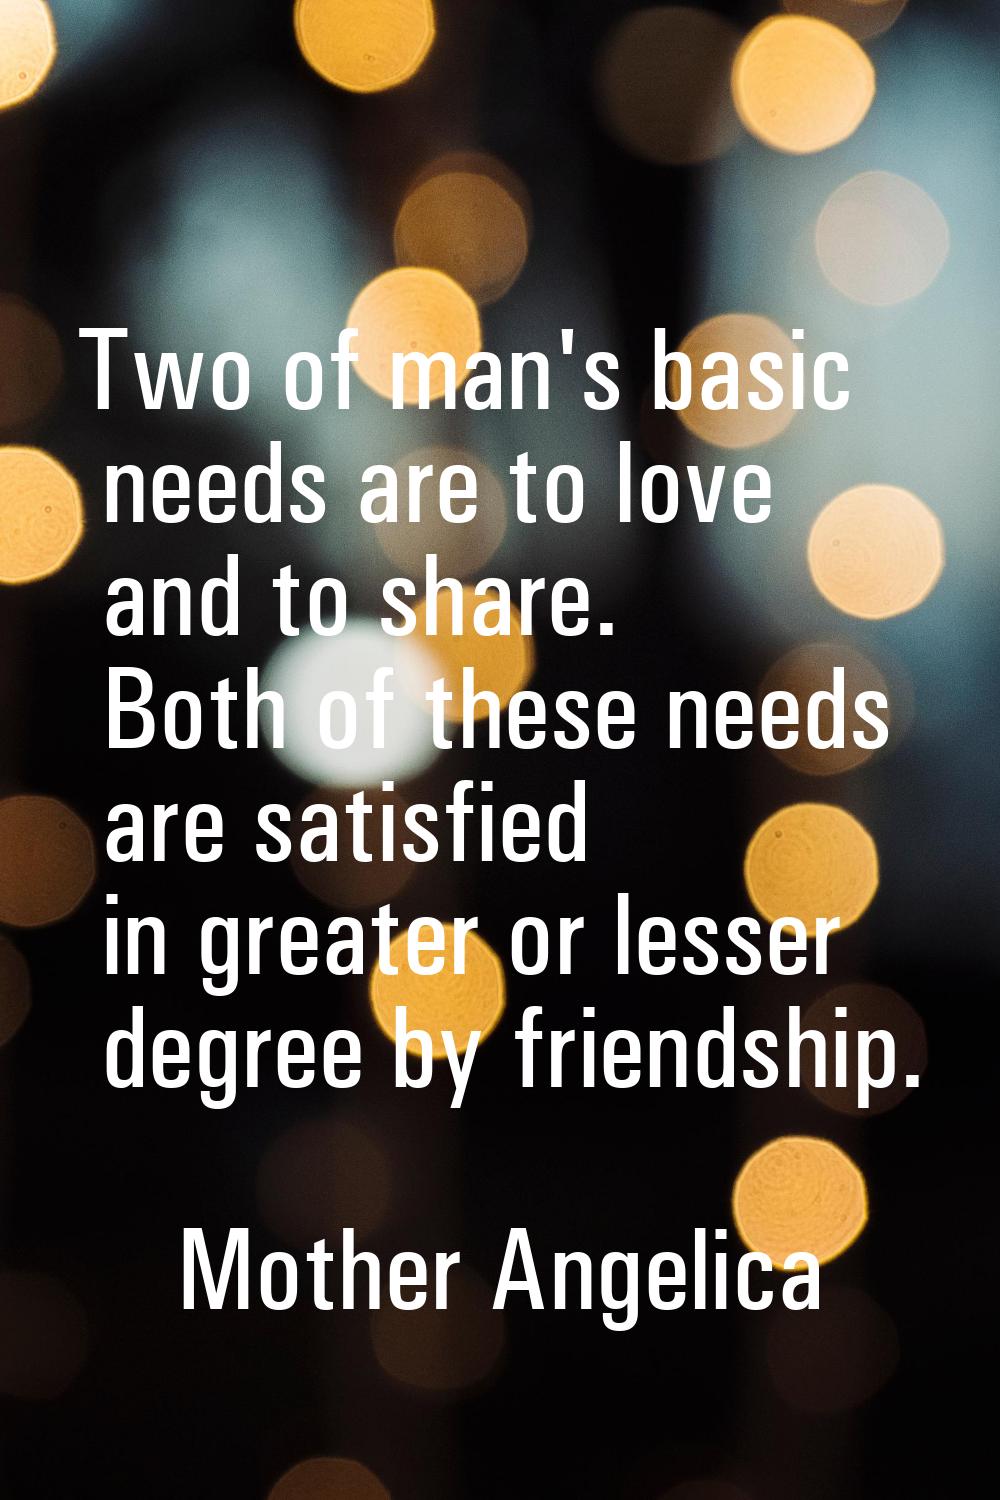 Two of man's basic needs are to love and to share. Both of these needs are satisfied in greater or 